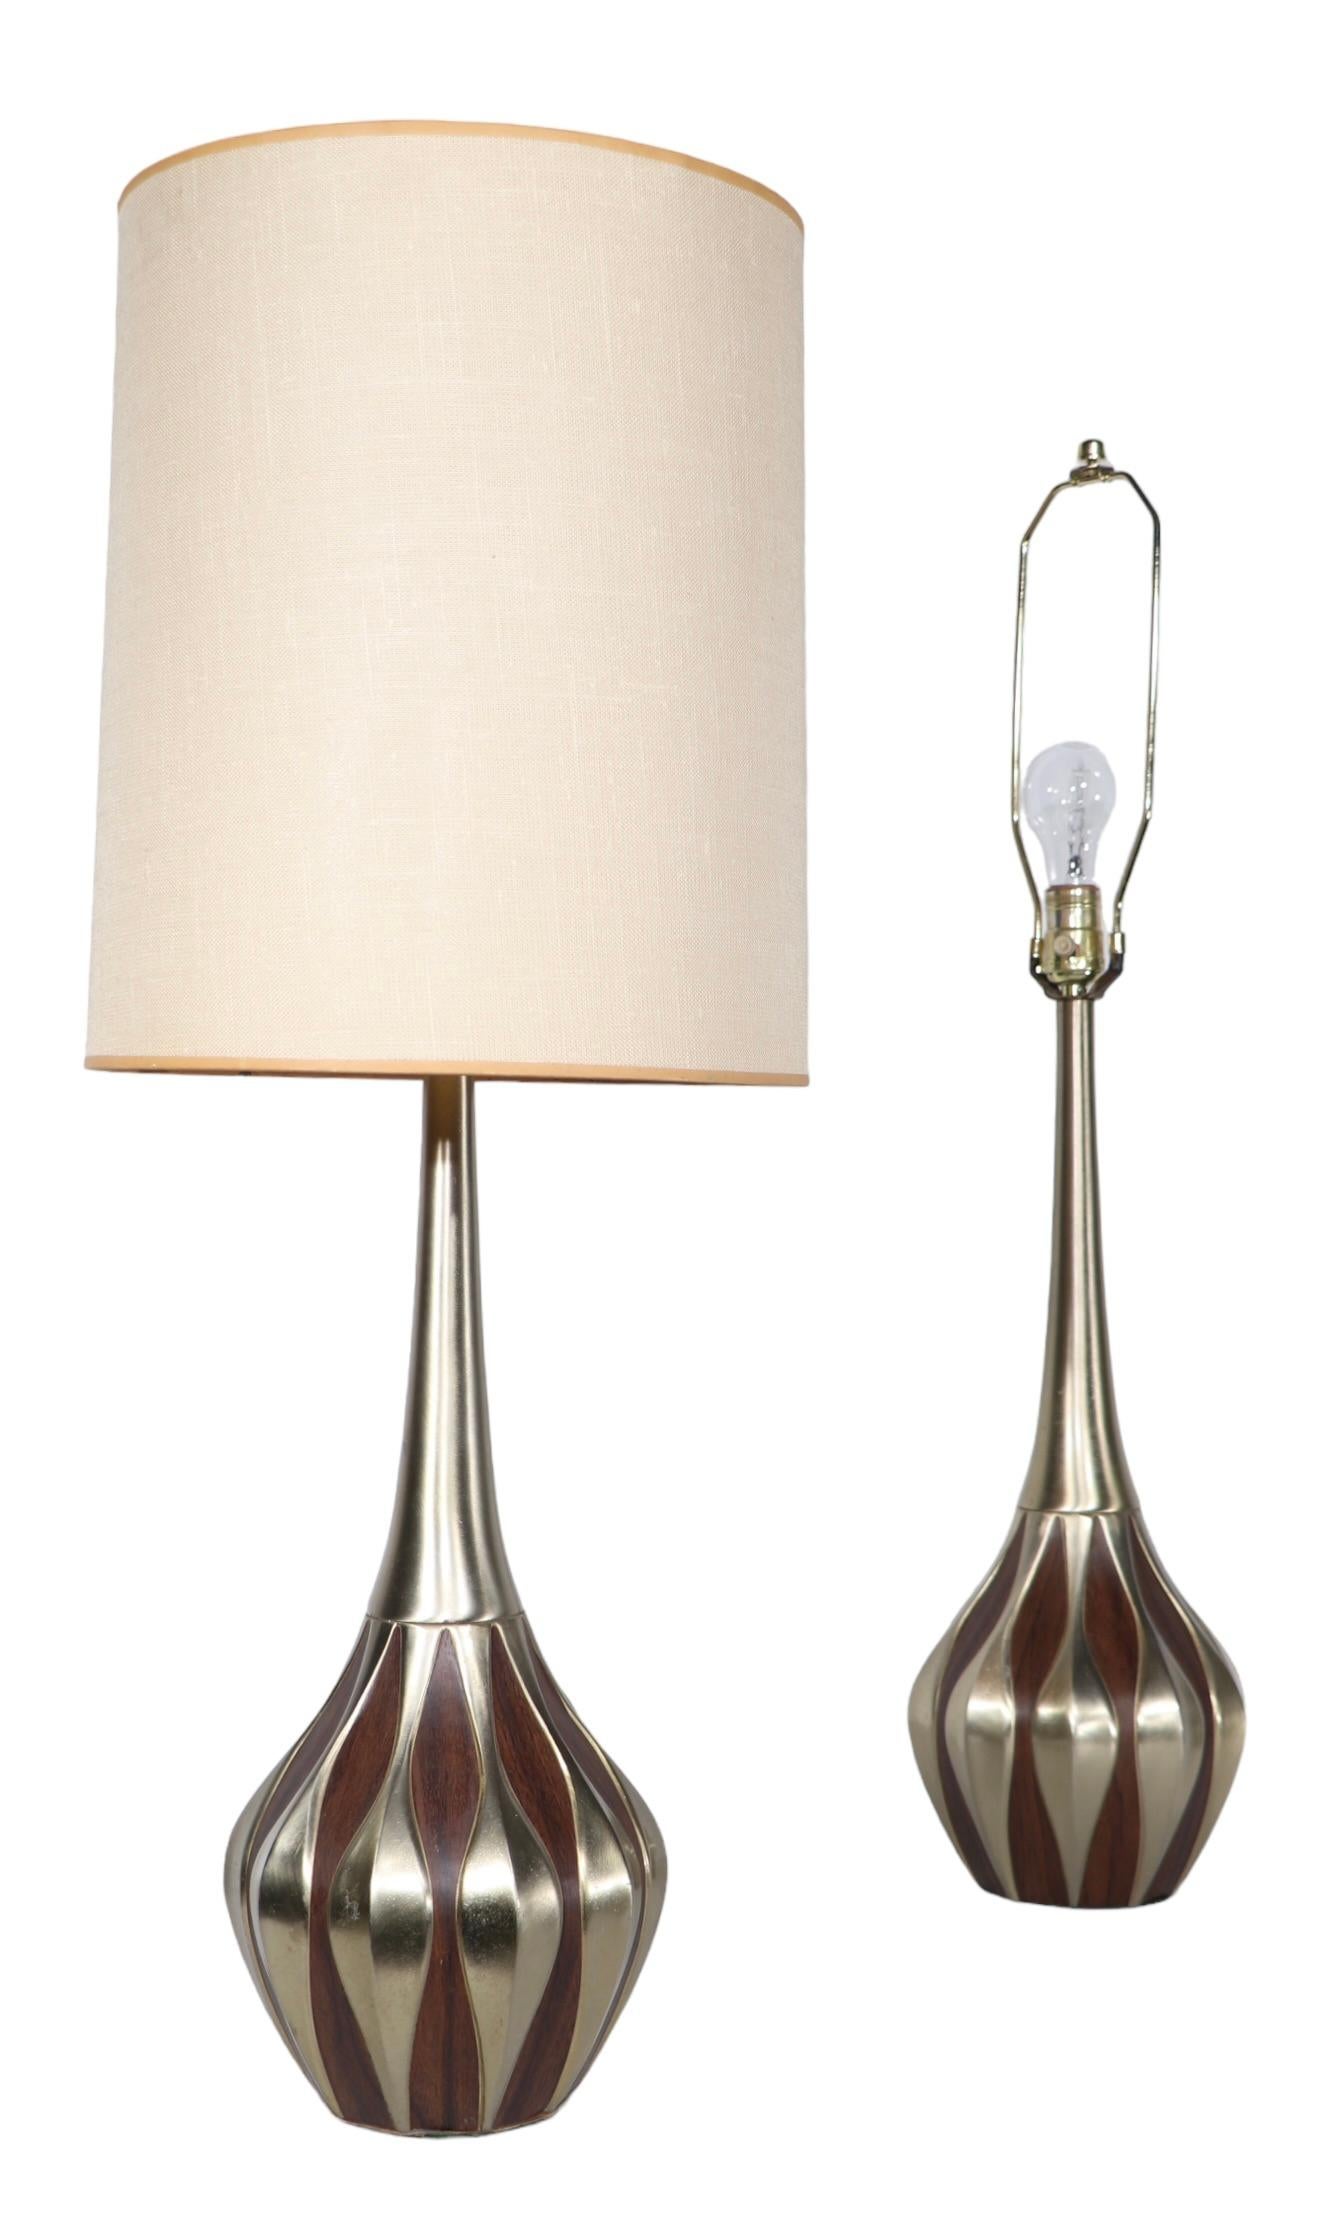 Chic pair of Genie table lamps, made by The Laurel Lamp Company, model H-803  circa 1960's. Sophisticated, voguish style, hard to find examples, especially hard to find in pairs.  The lamps are both in very good, original, clean and working